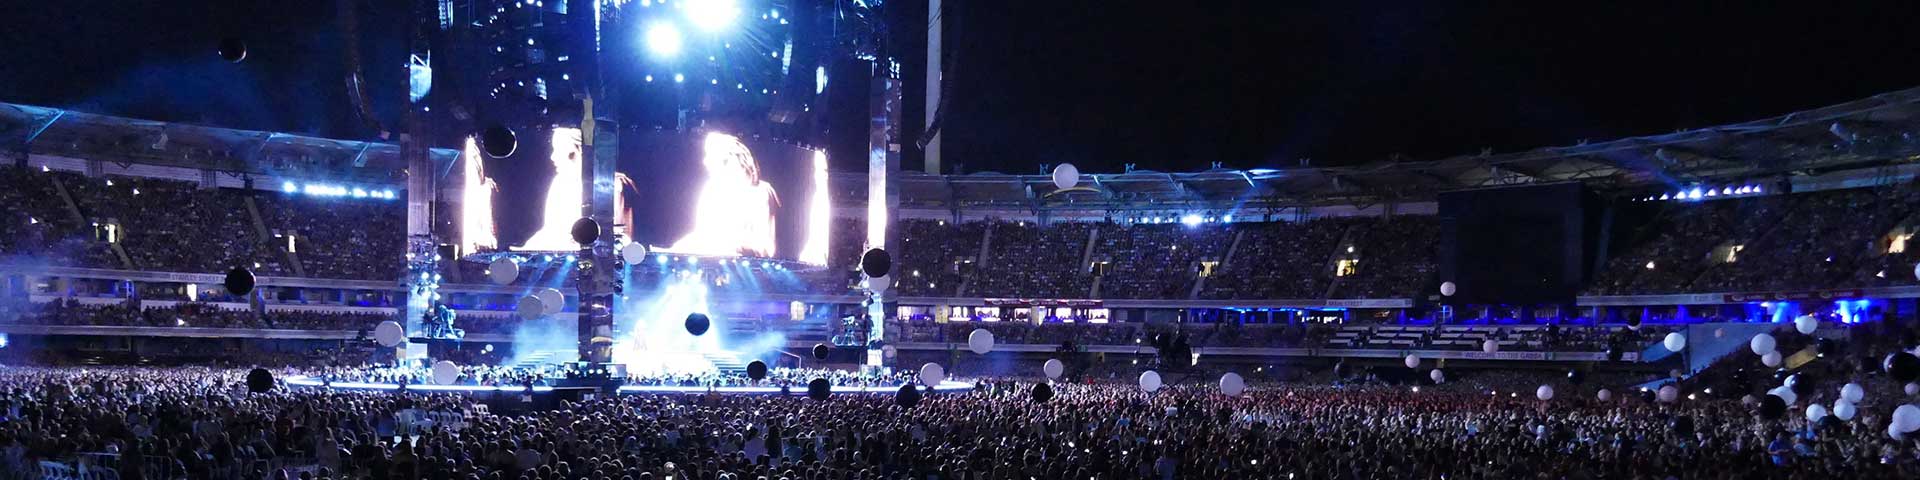 Adele Concert at The Gabba